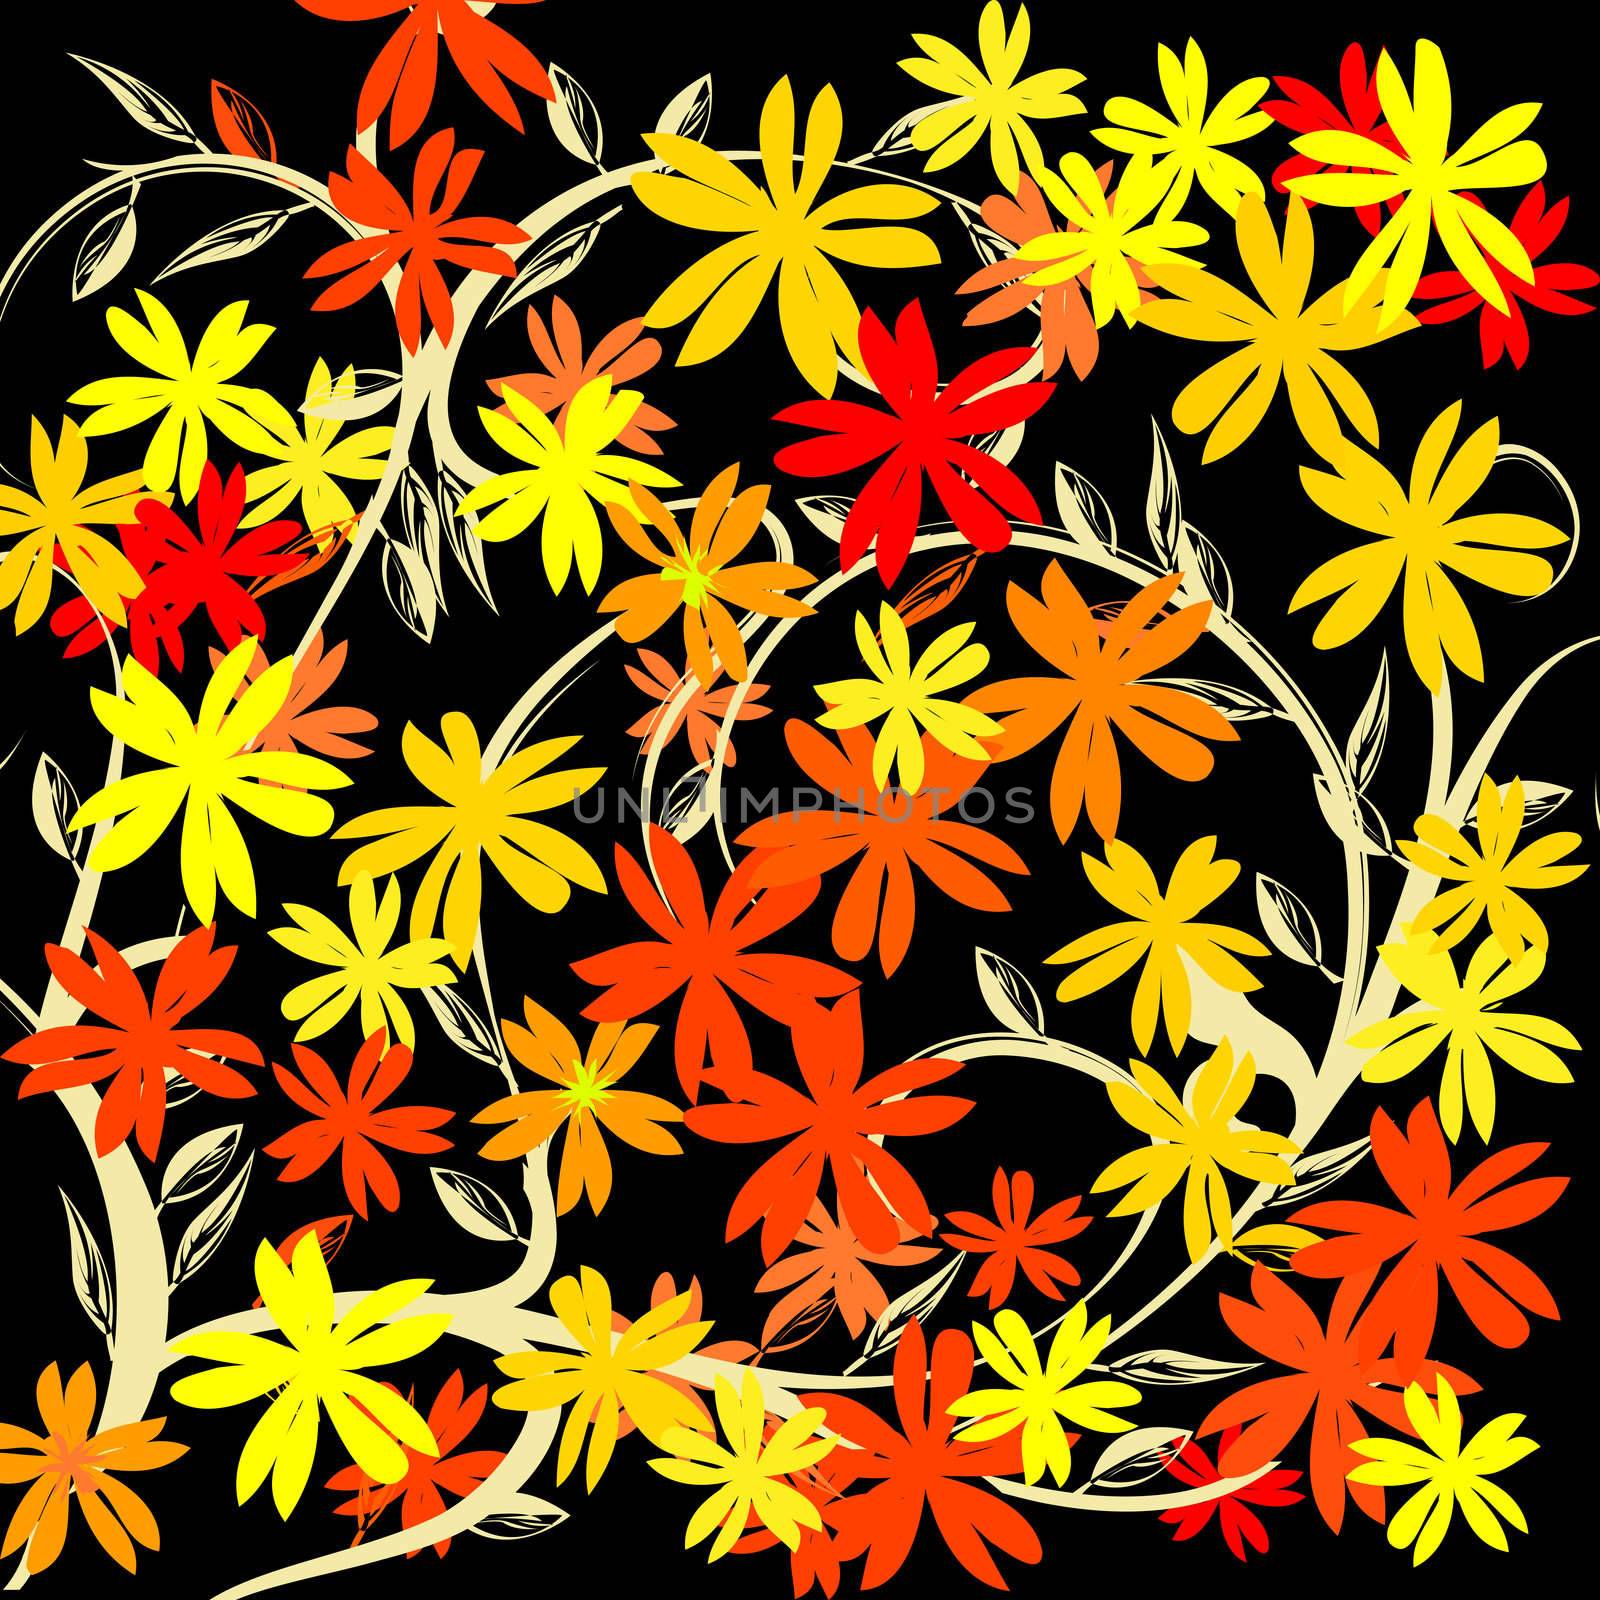 Background illustration with floral design, abstract art